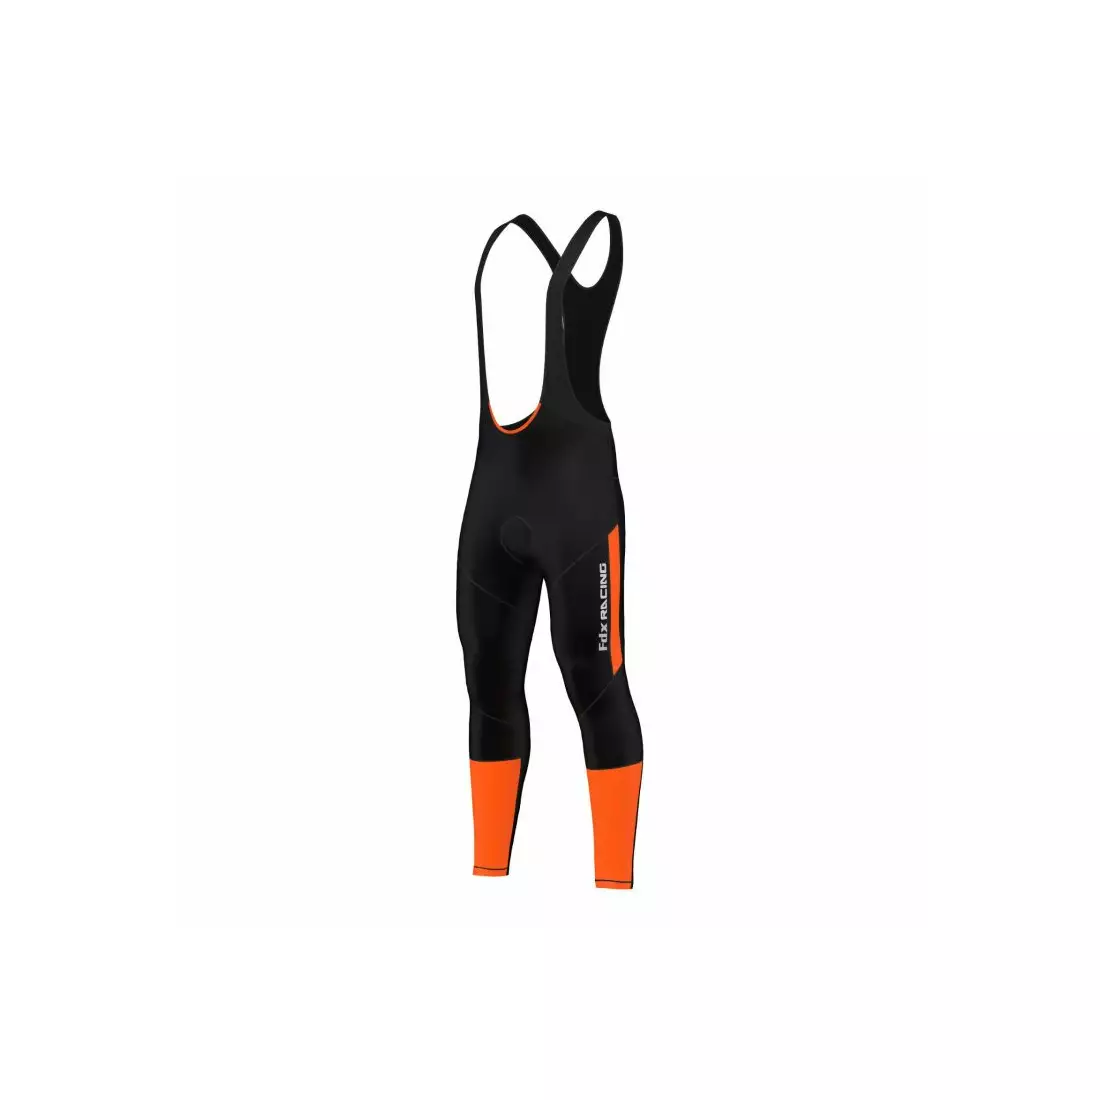 FDX 1220 insulated cycling trousers, black-orange